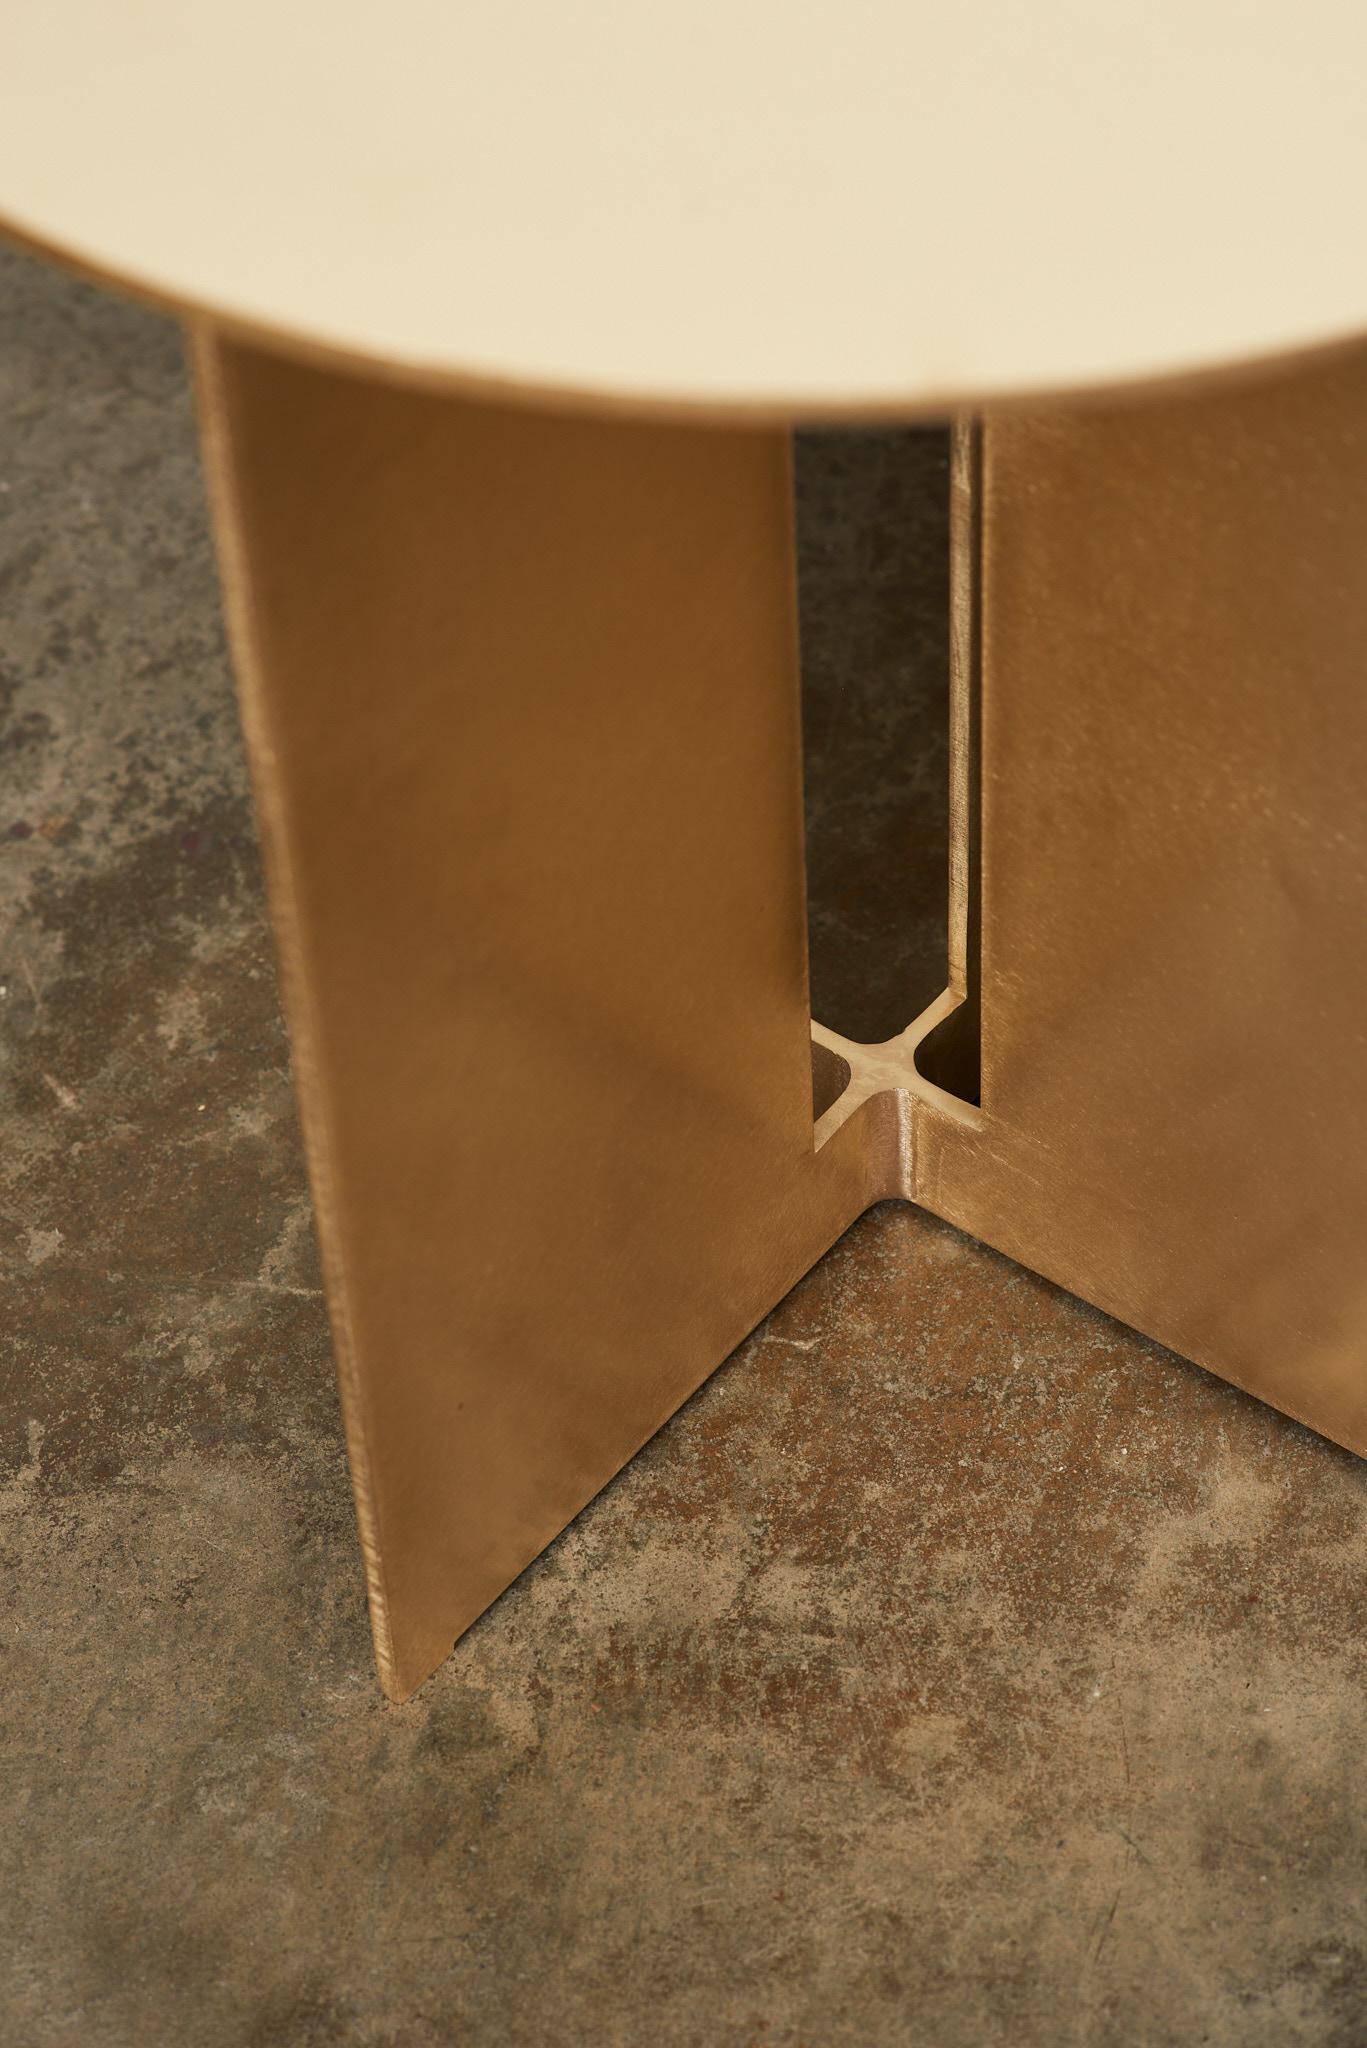 The Mers side table is fabricated from solid bronze and is suitable for use indoors and out. Form is inspired by the simple utilitarianism of West Coast aluminum fishing boats.

Shown in Satin Bronze finish.
Custom sizing available.

Overall